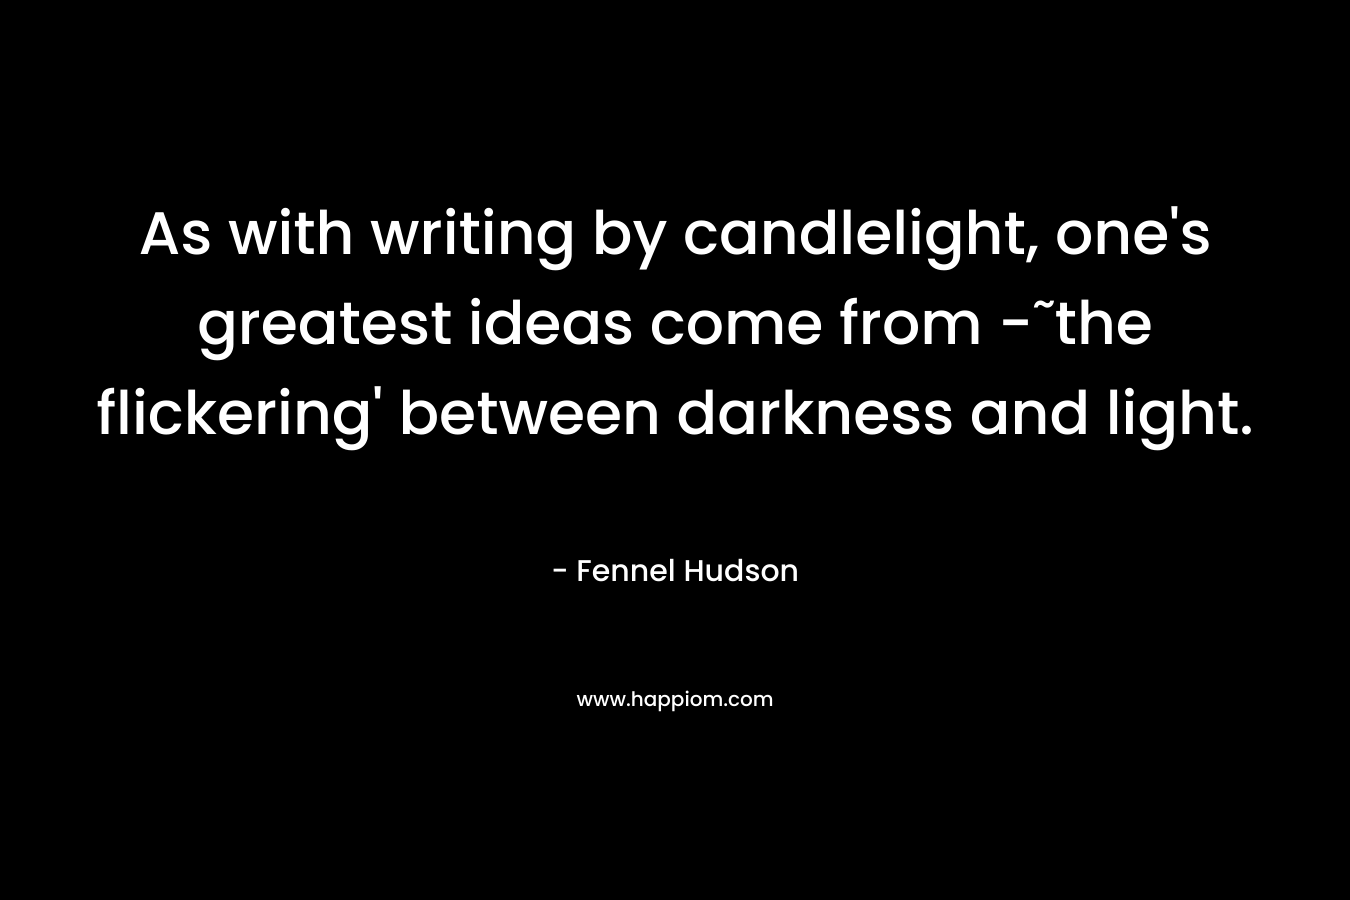 As with writing by candlelight, one’s greatest ideas come from -˜the flickering’ between darkness and light. – Fennel Hudson